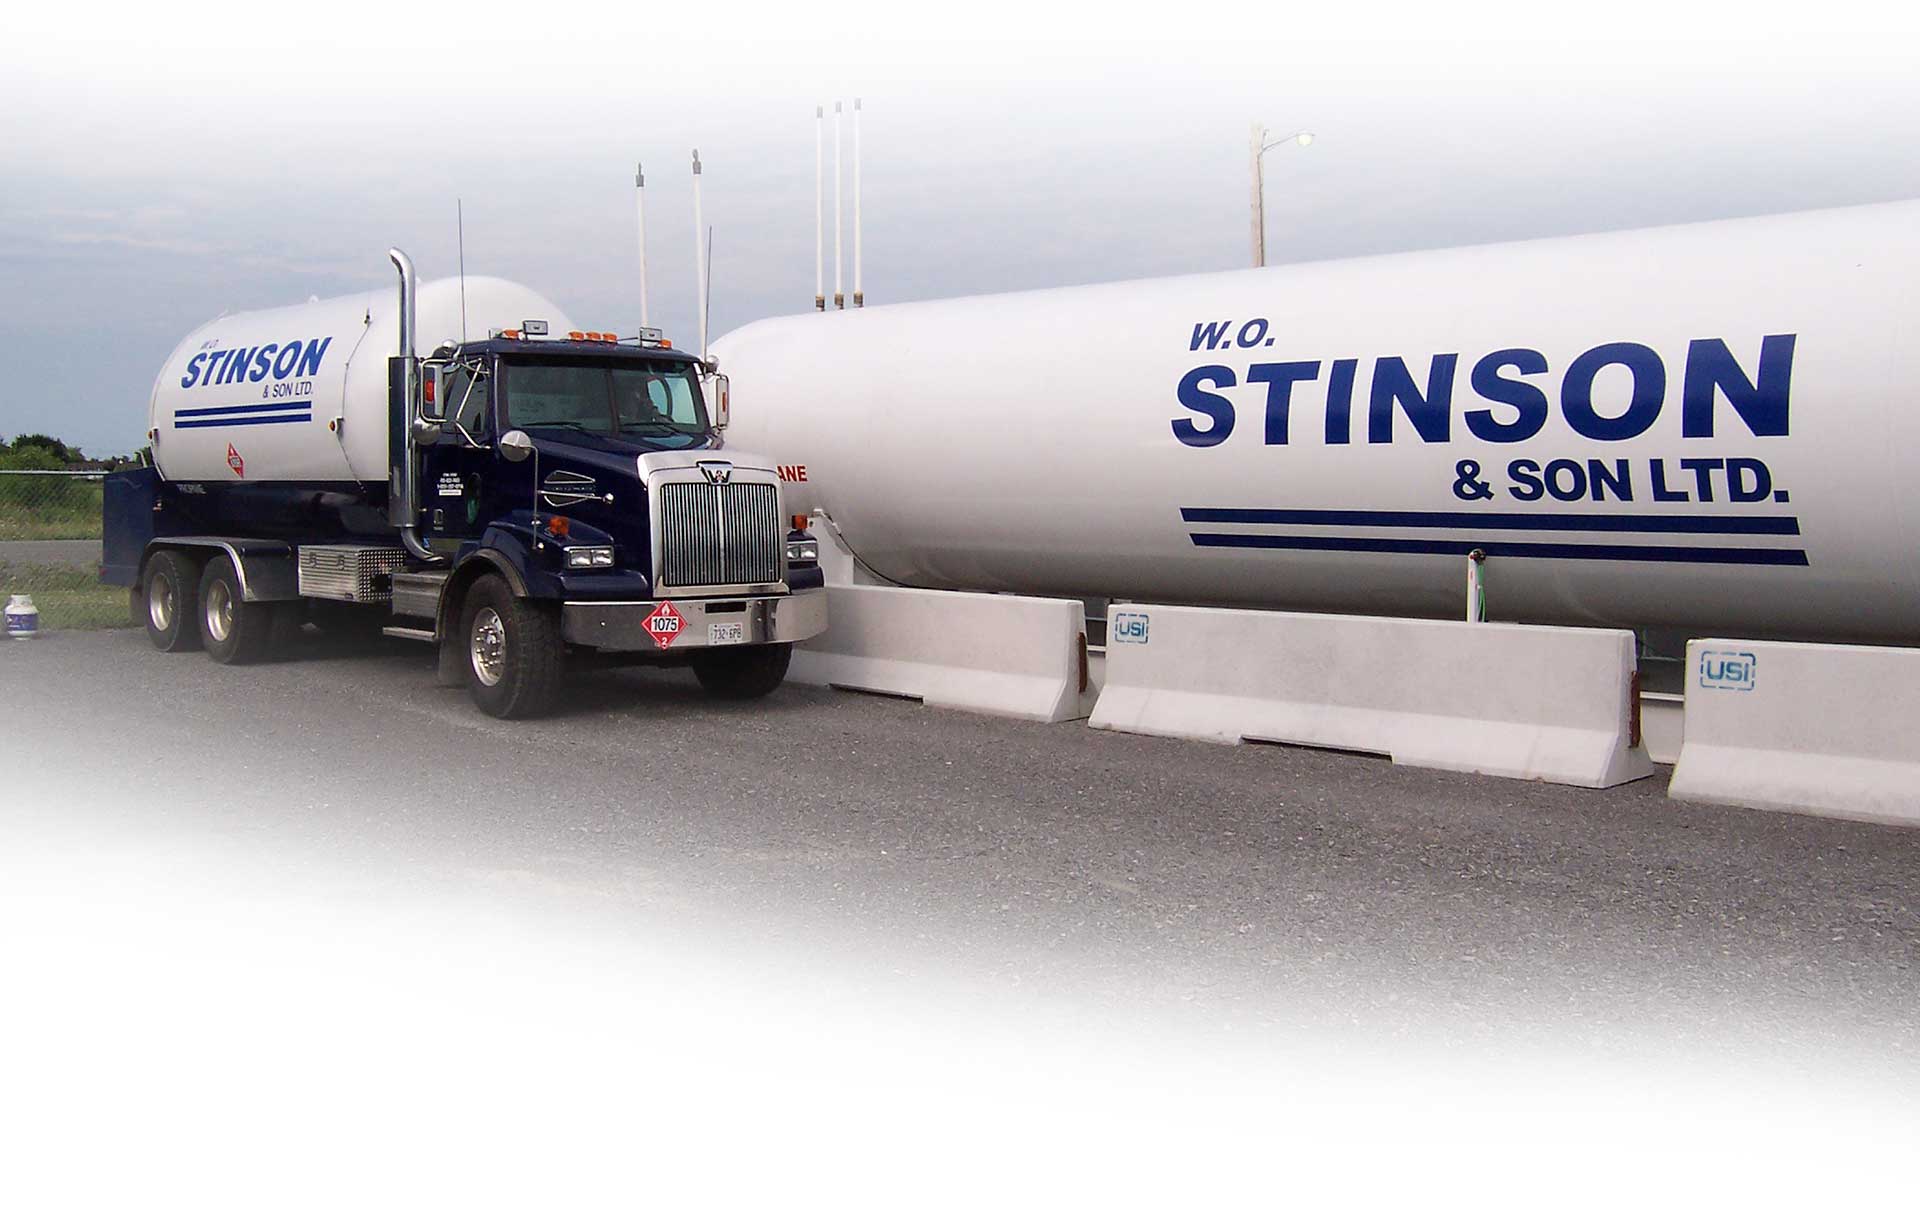 Image of a Stinson delivery truck beside a large cylinder propane tank